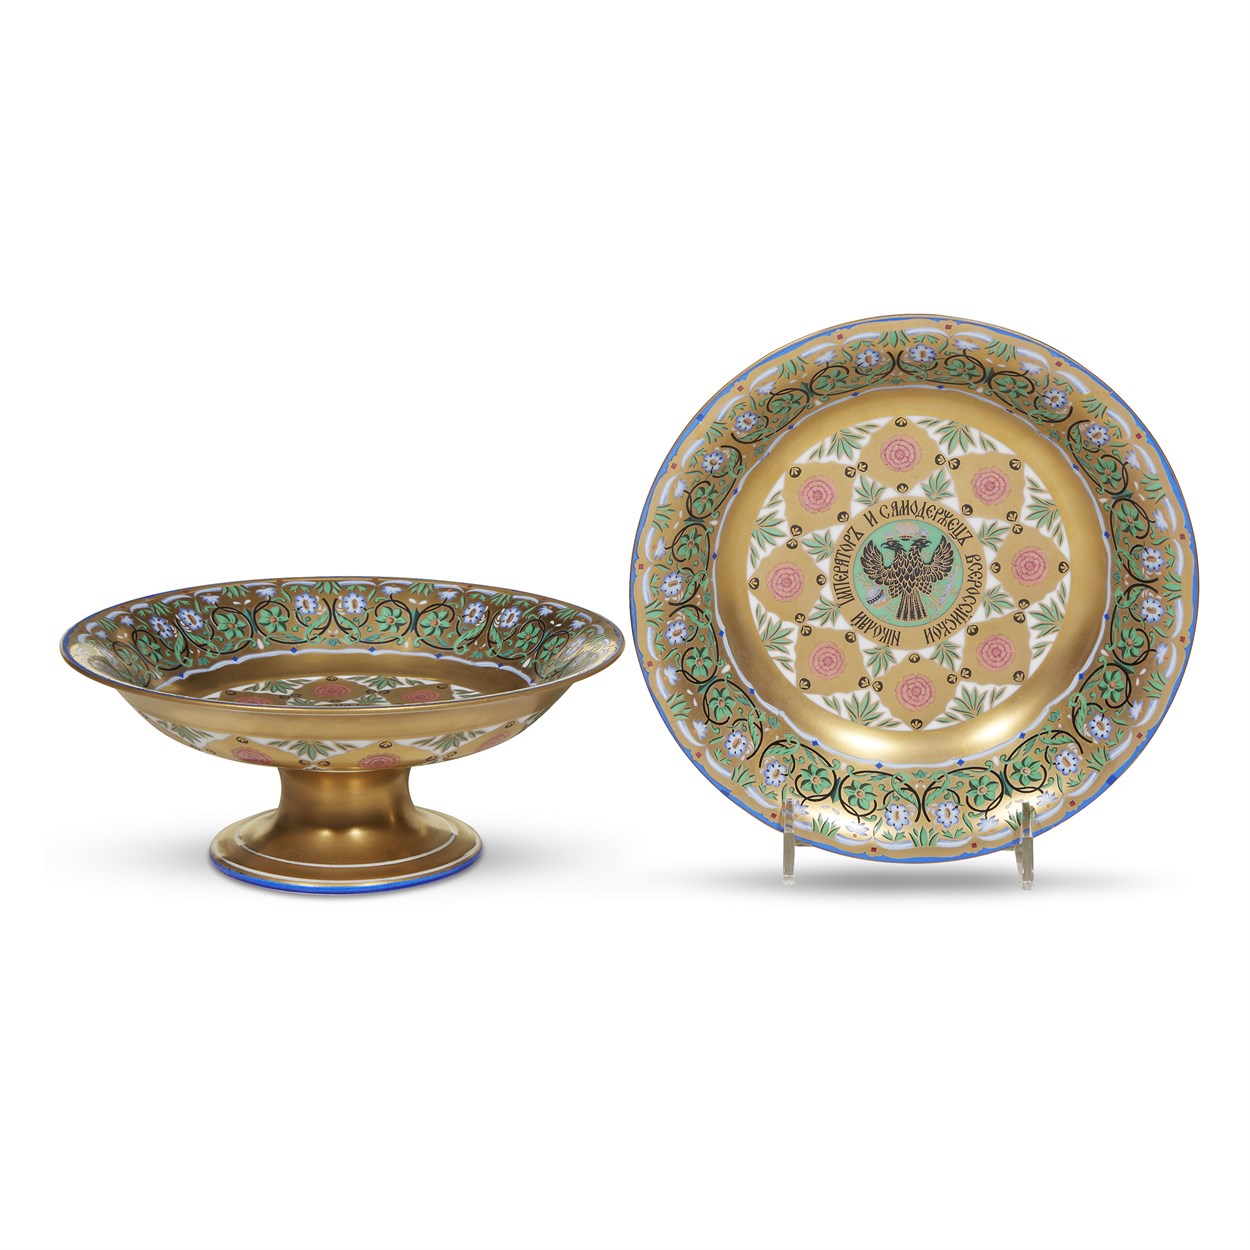 Lot 1 - A pair of hand-painted and parcel-gilt porcelain tazze decorated in the manner of the 'Great Kremlin Service'